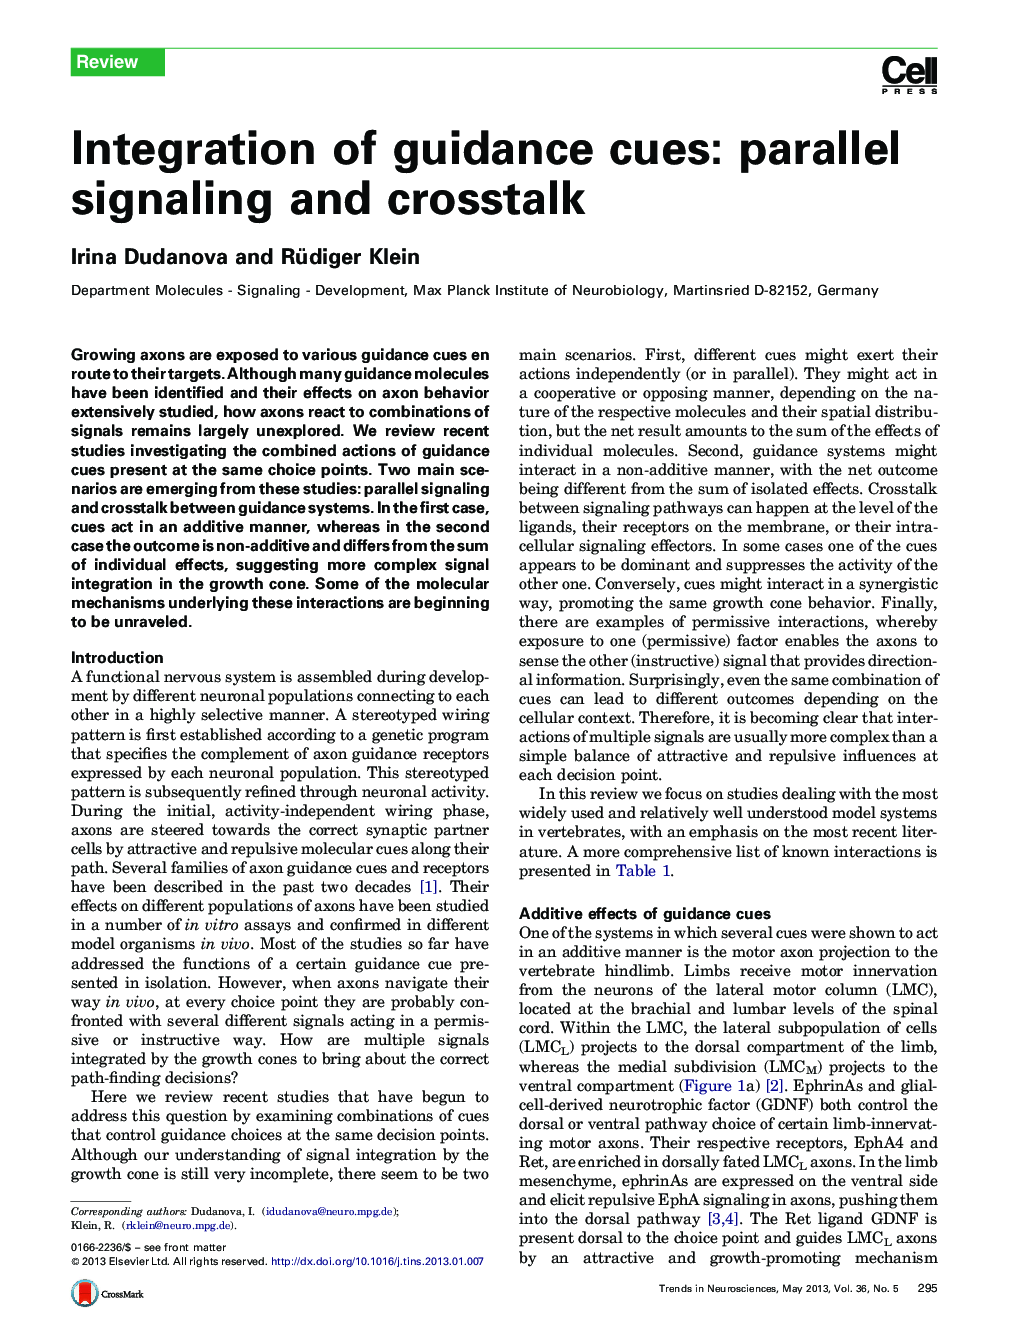 Integration of guidance cues: parallel signaling and crosstalk